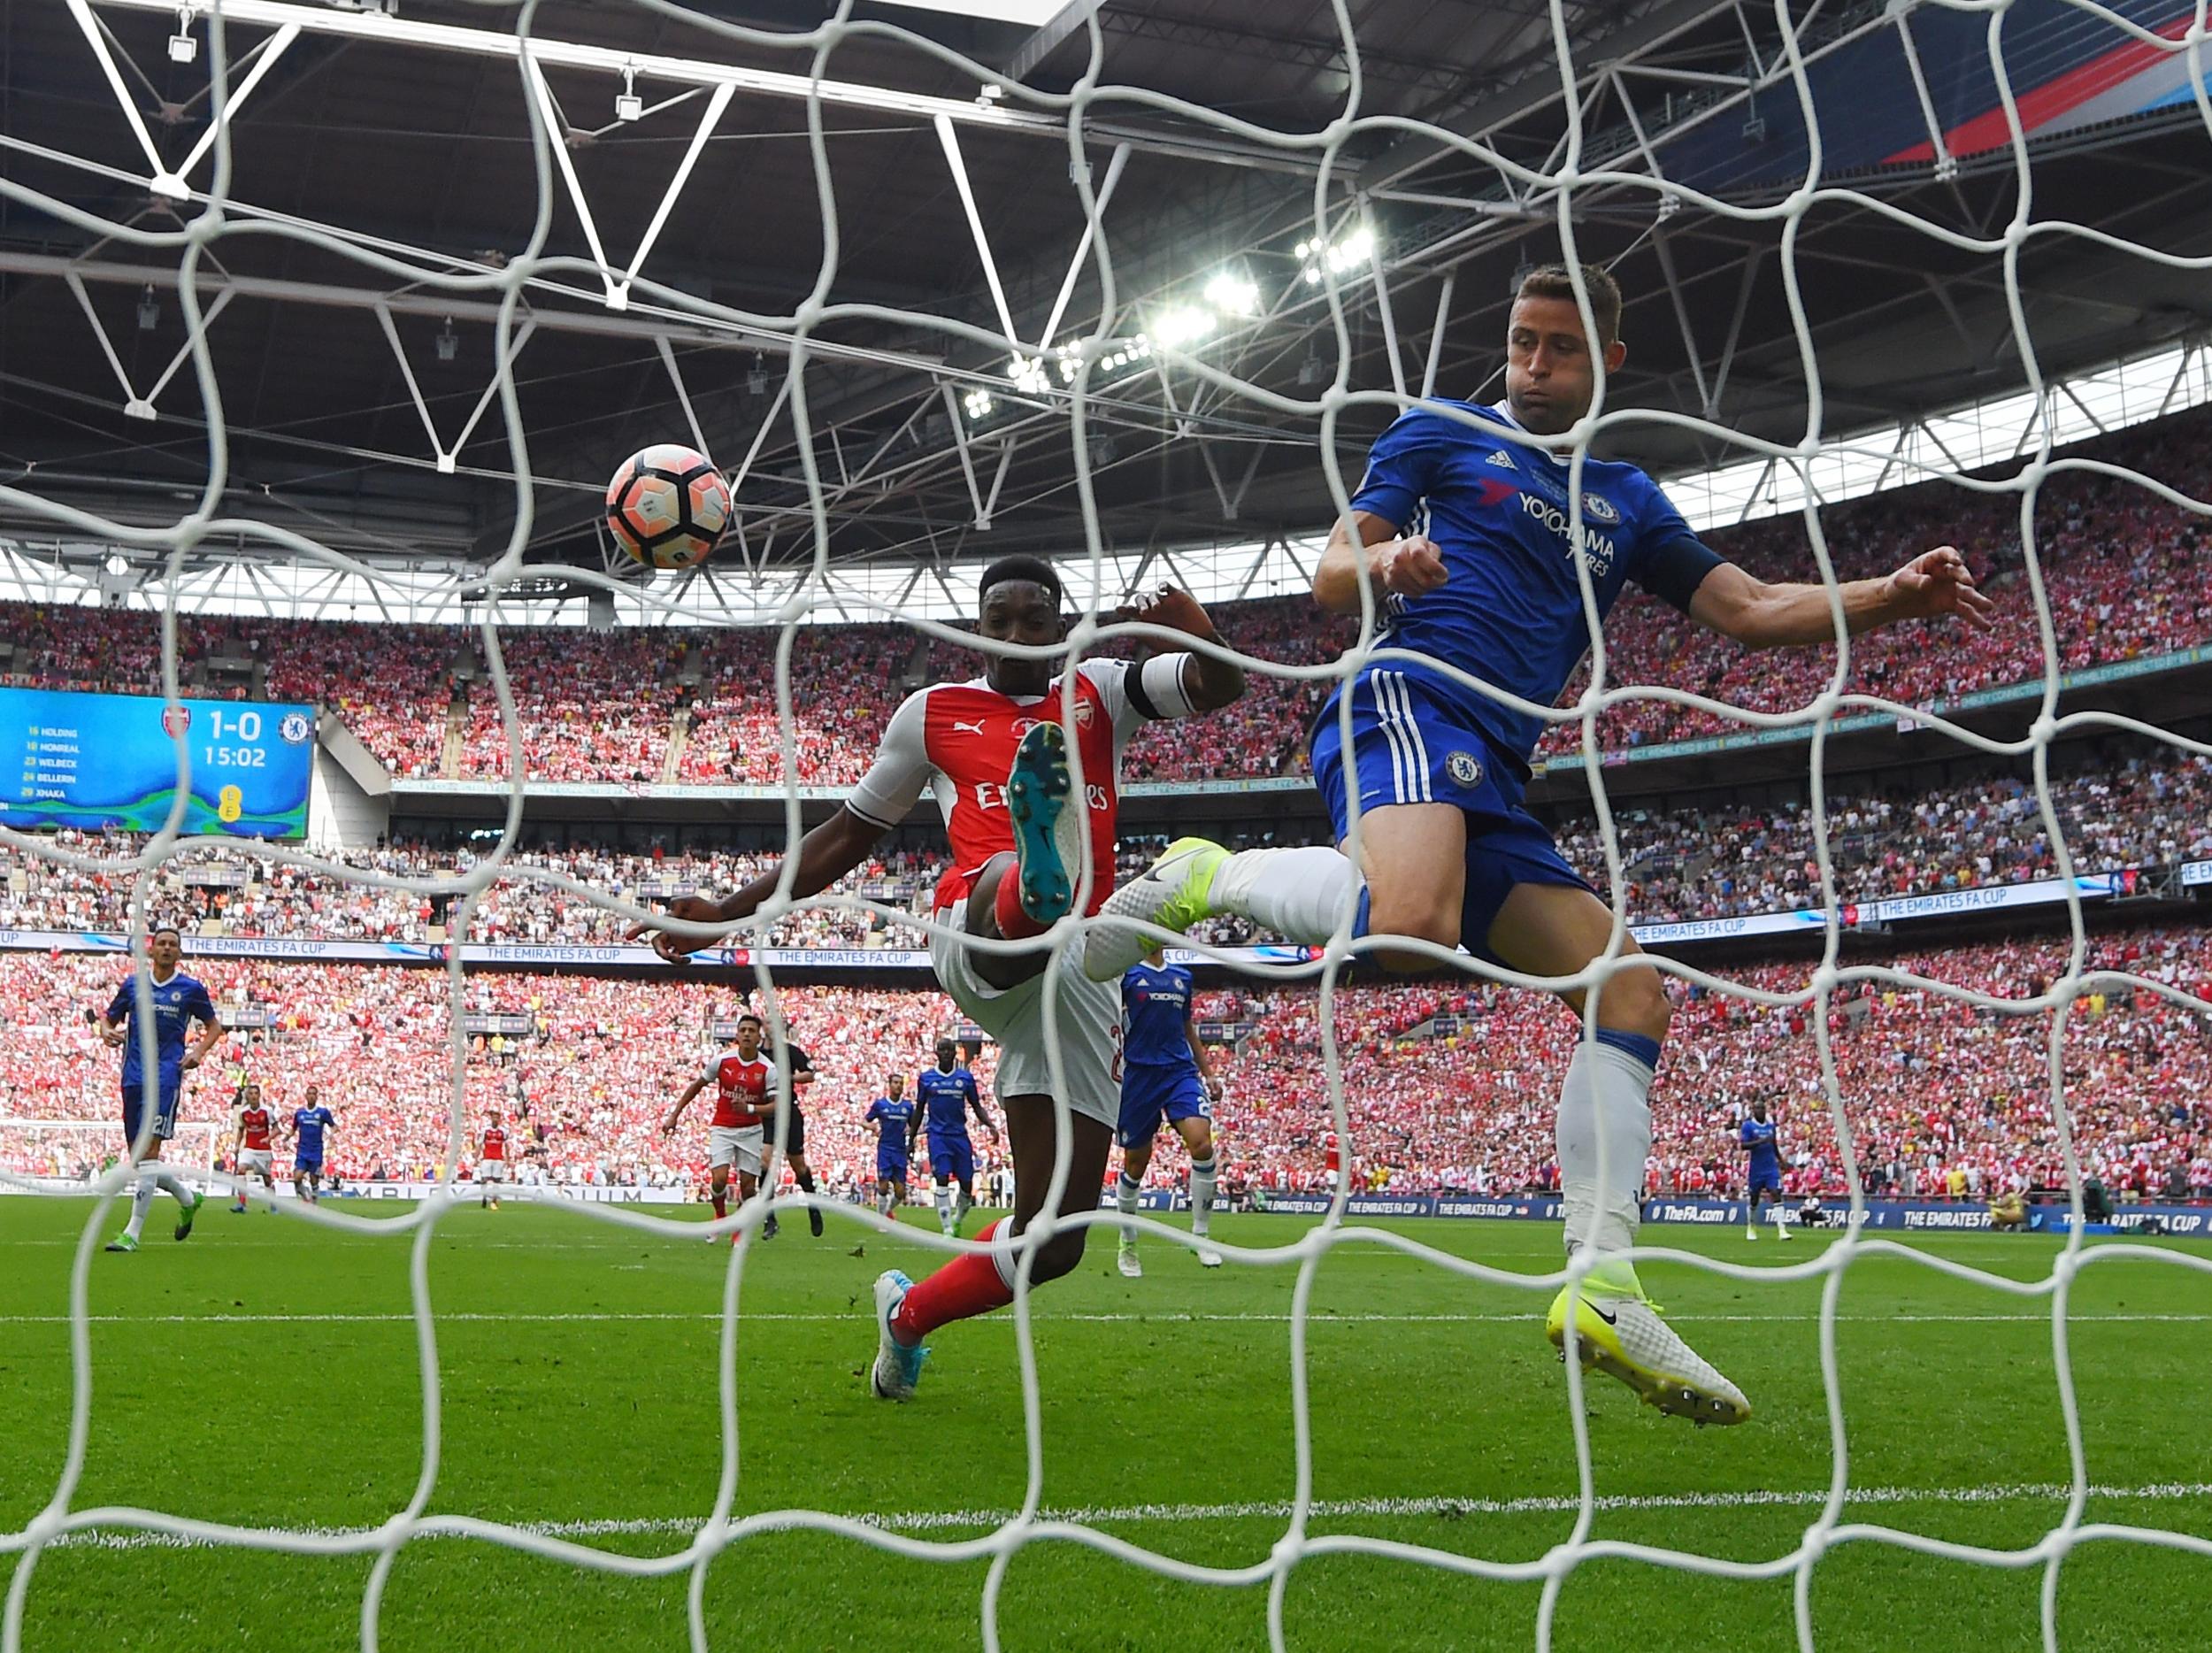 Cahill flicked the ball off the line in the first-half